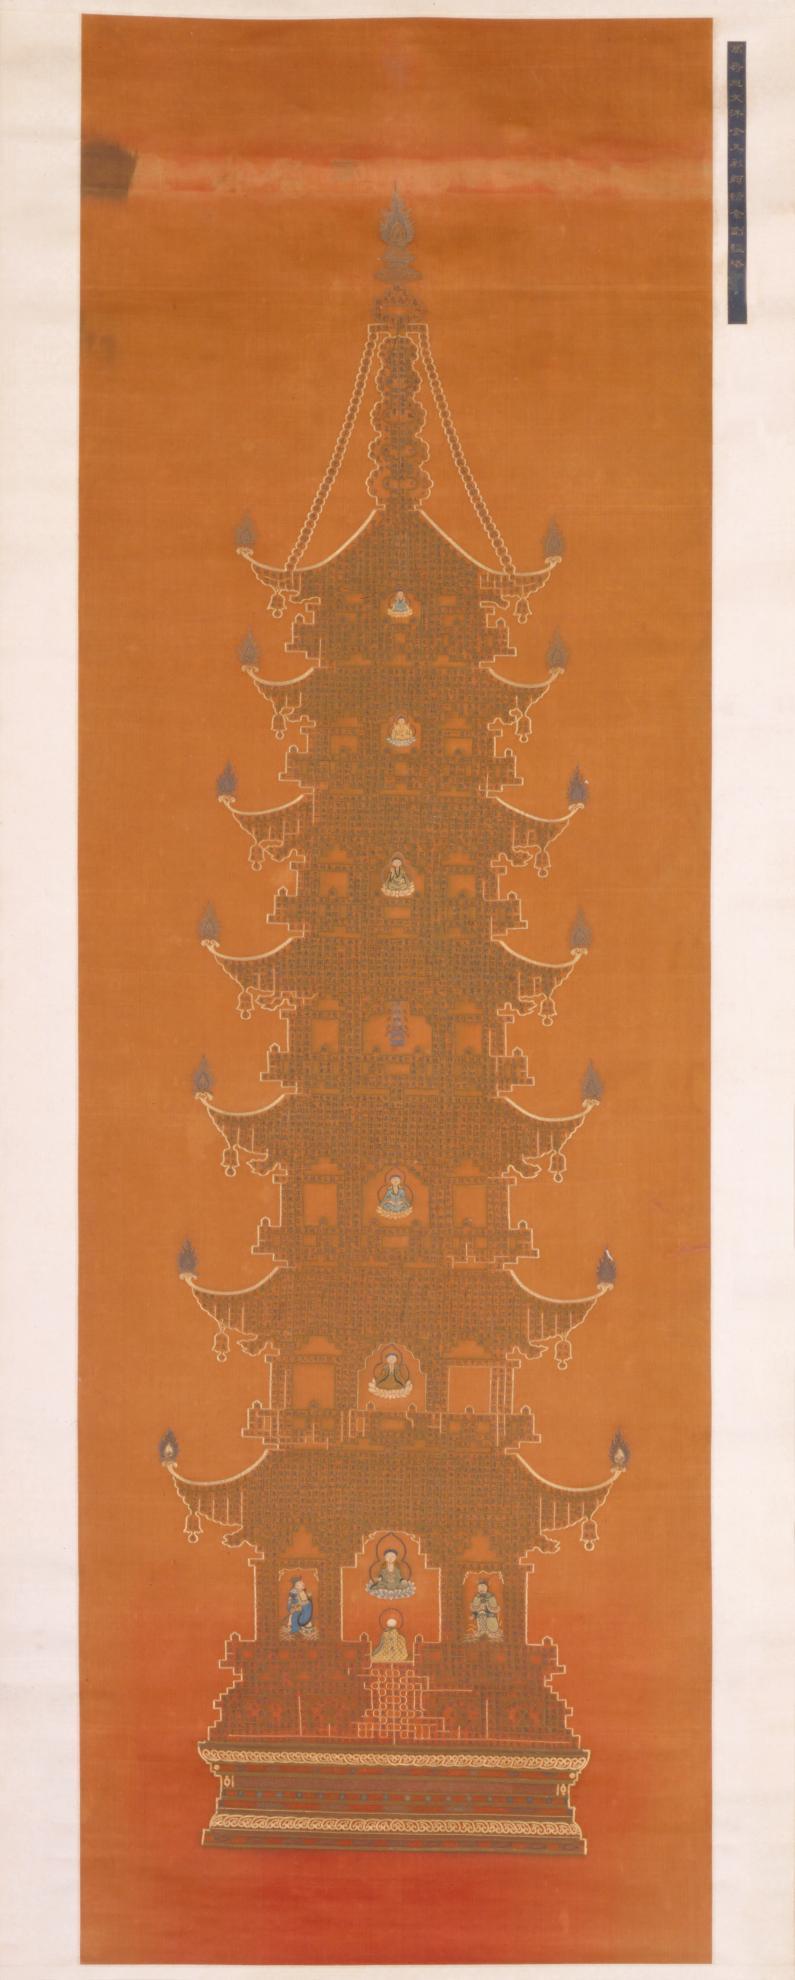 Pagoda with the Diamond Sutra Qing dynasty, Qianlong period (1736 95) Hanging scroll; embroidery on satin, gold and silver threads Palace Museum, Xin.